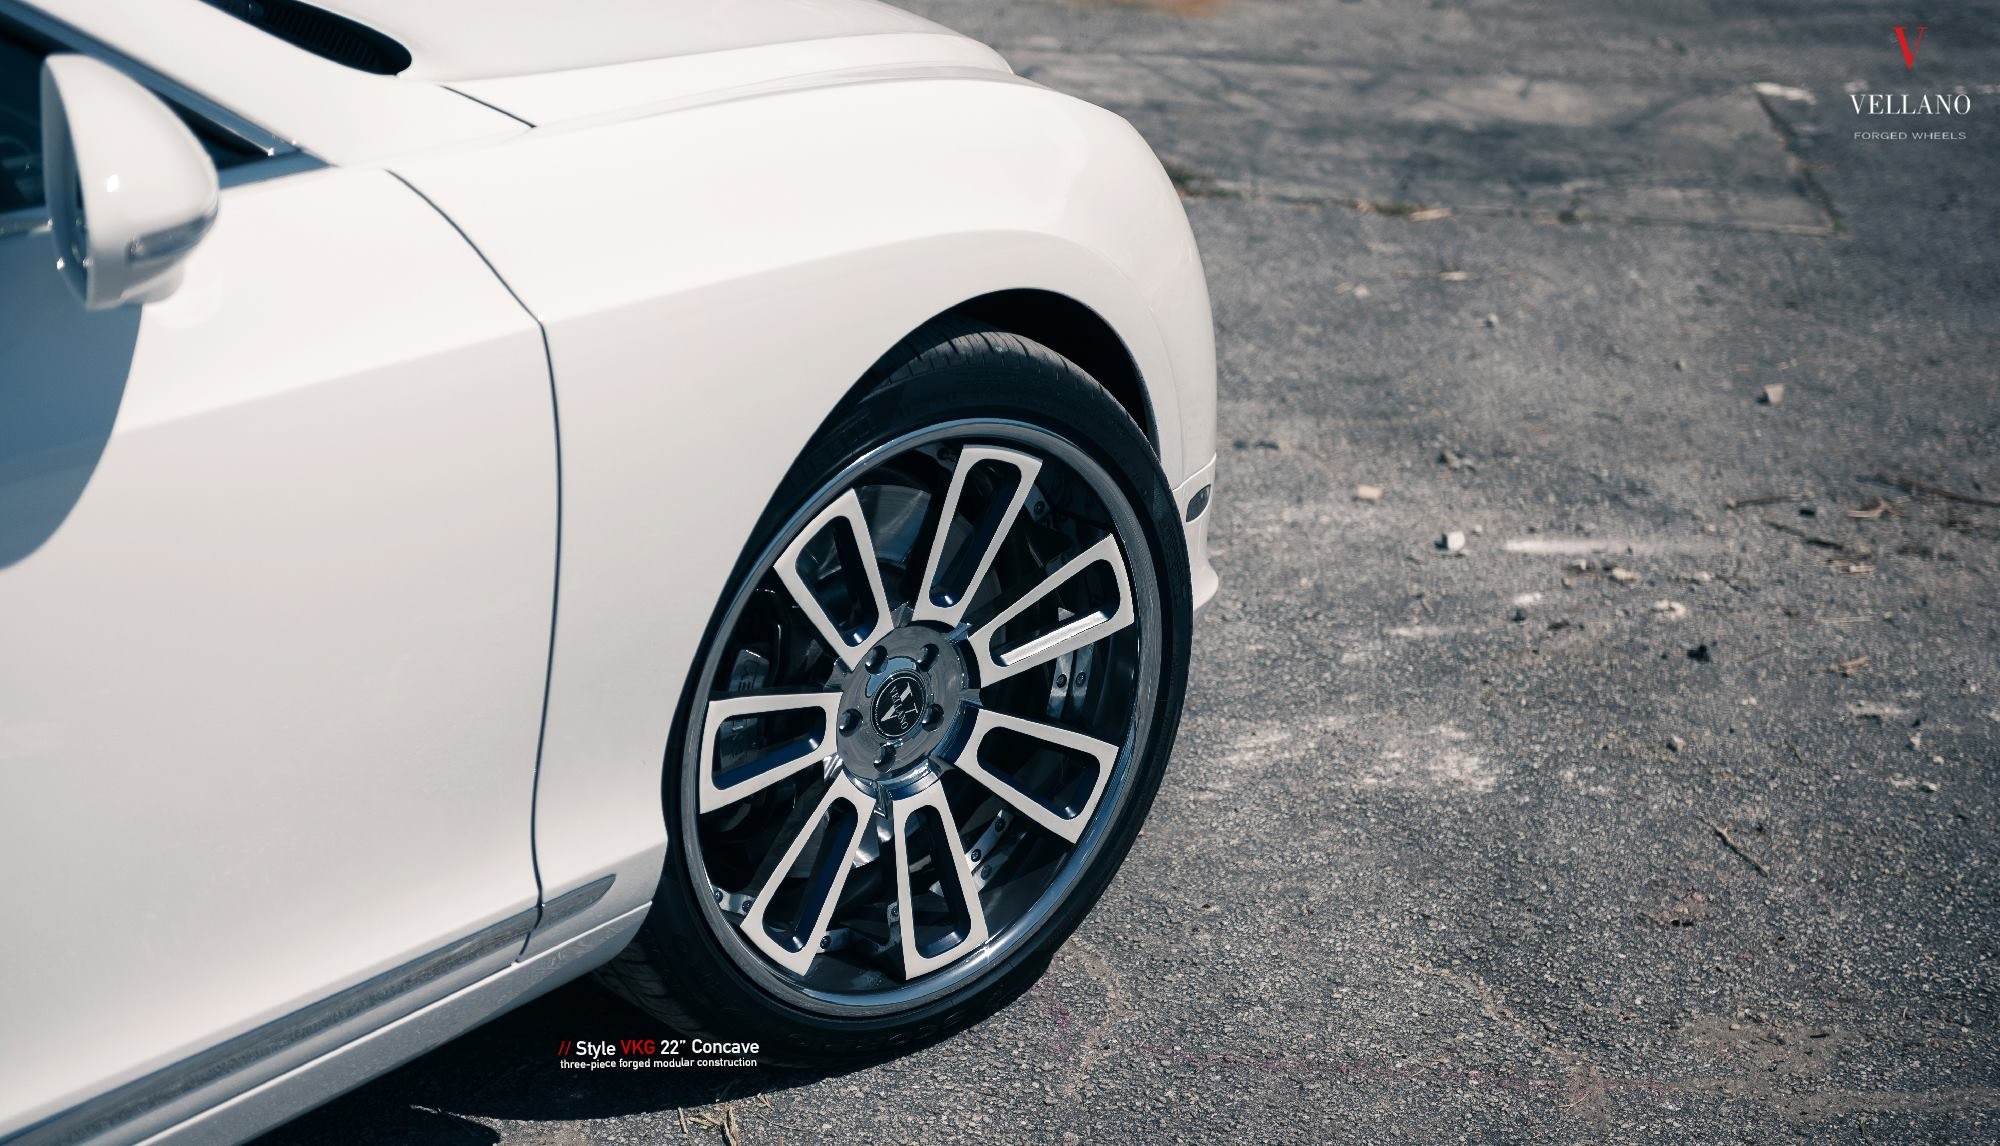 Vellano Concave Wheels on White Bentley Continental - Photo by Vellano